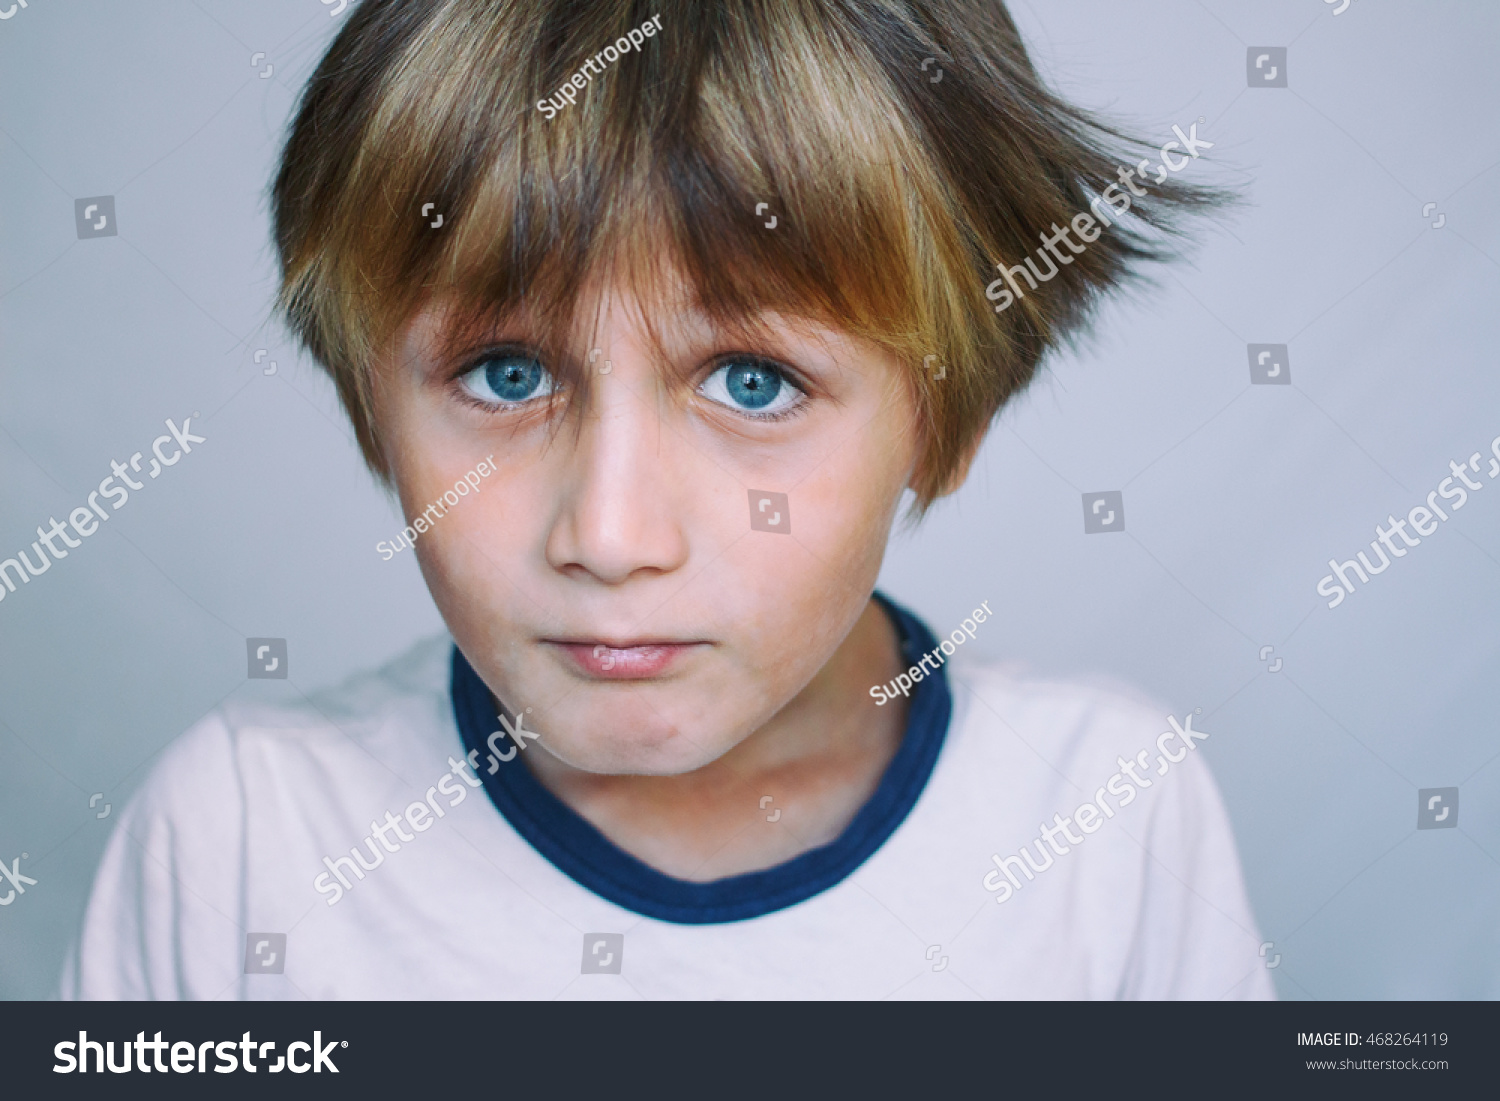 Boy 9 Years Old Front Light Stock Photo Edit Now 468264119